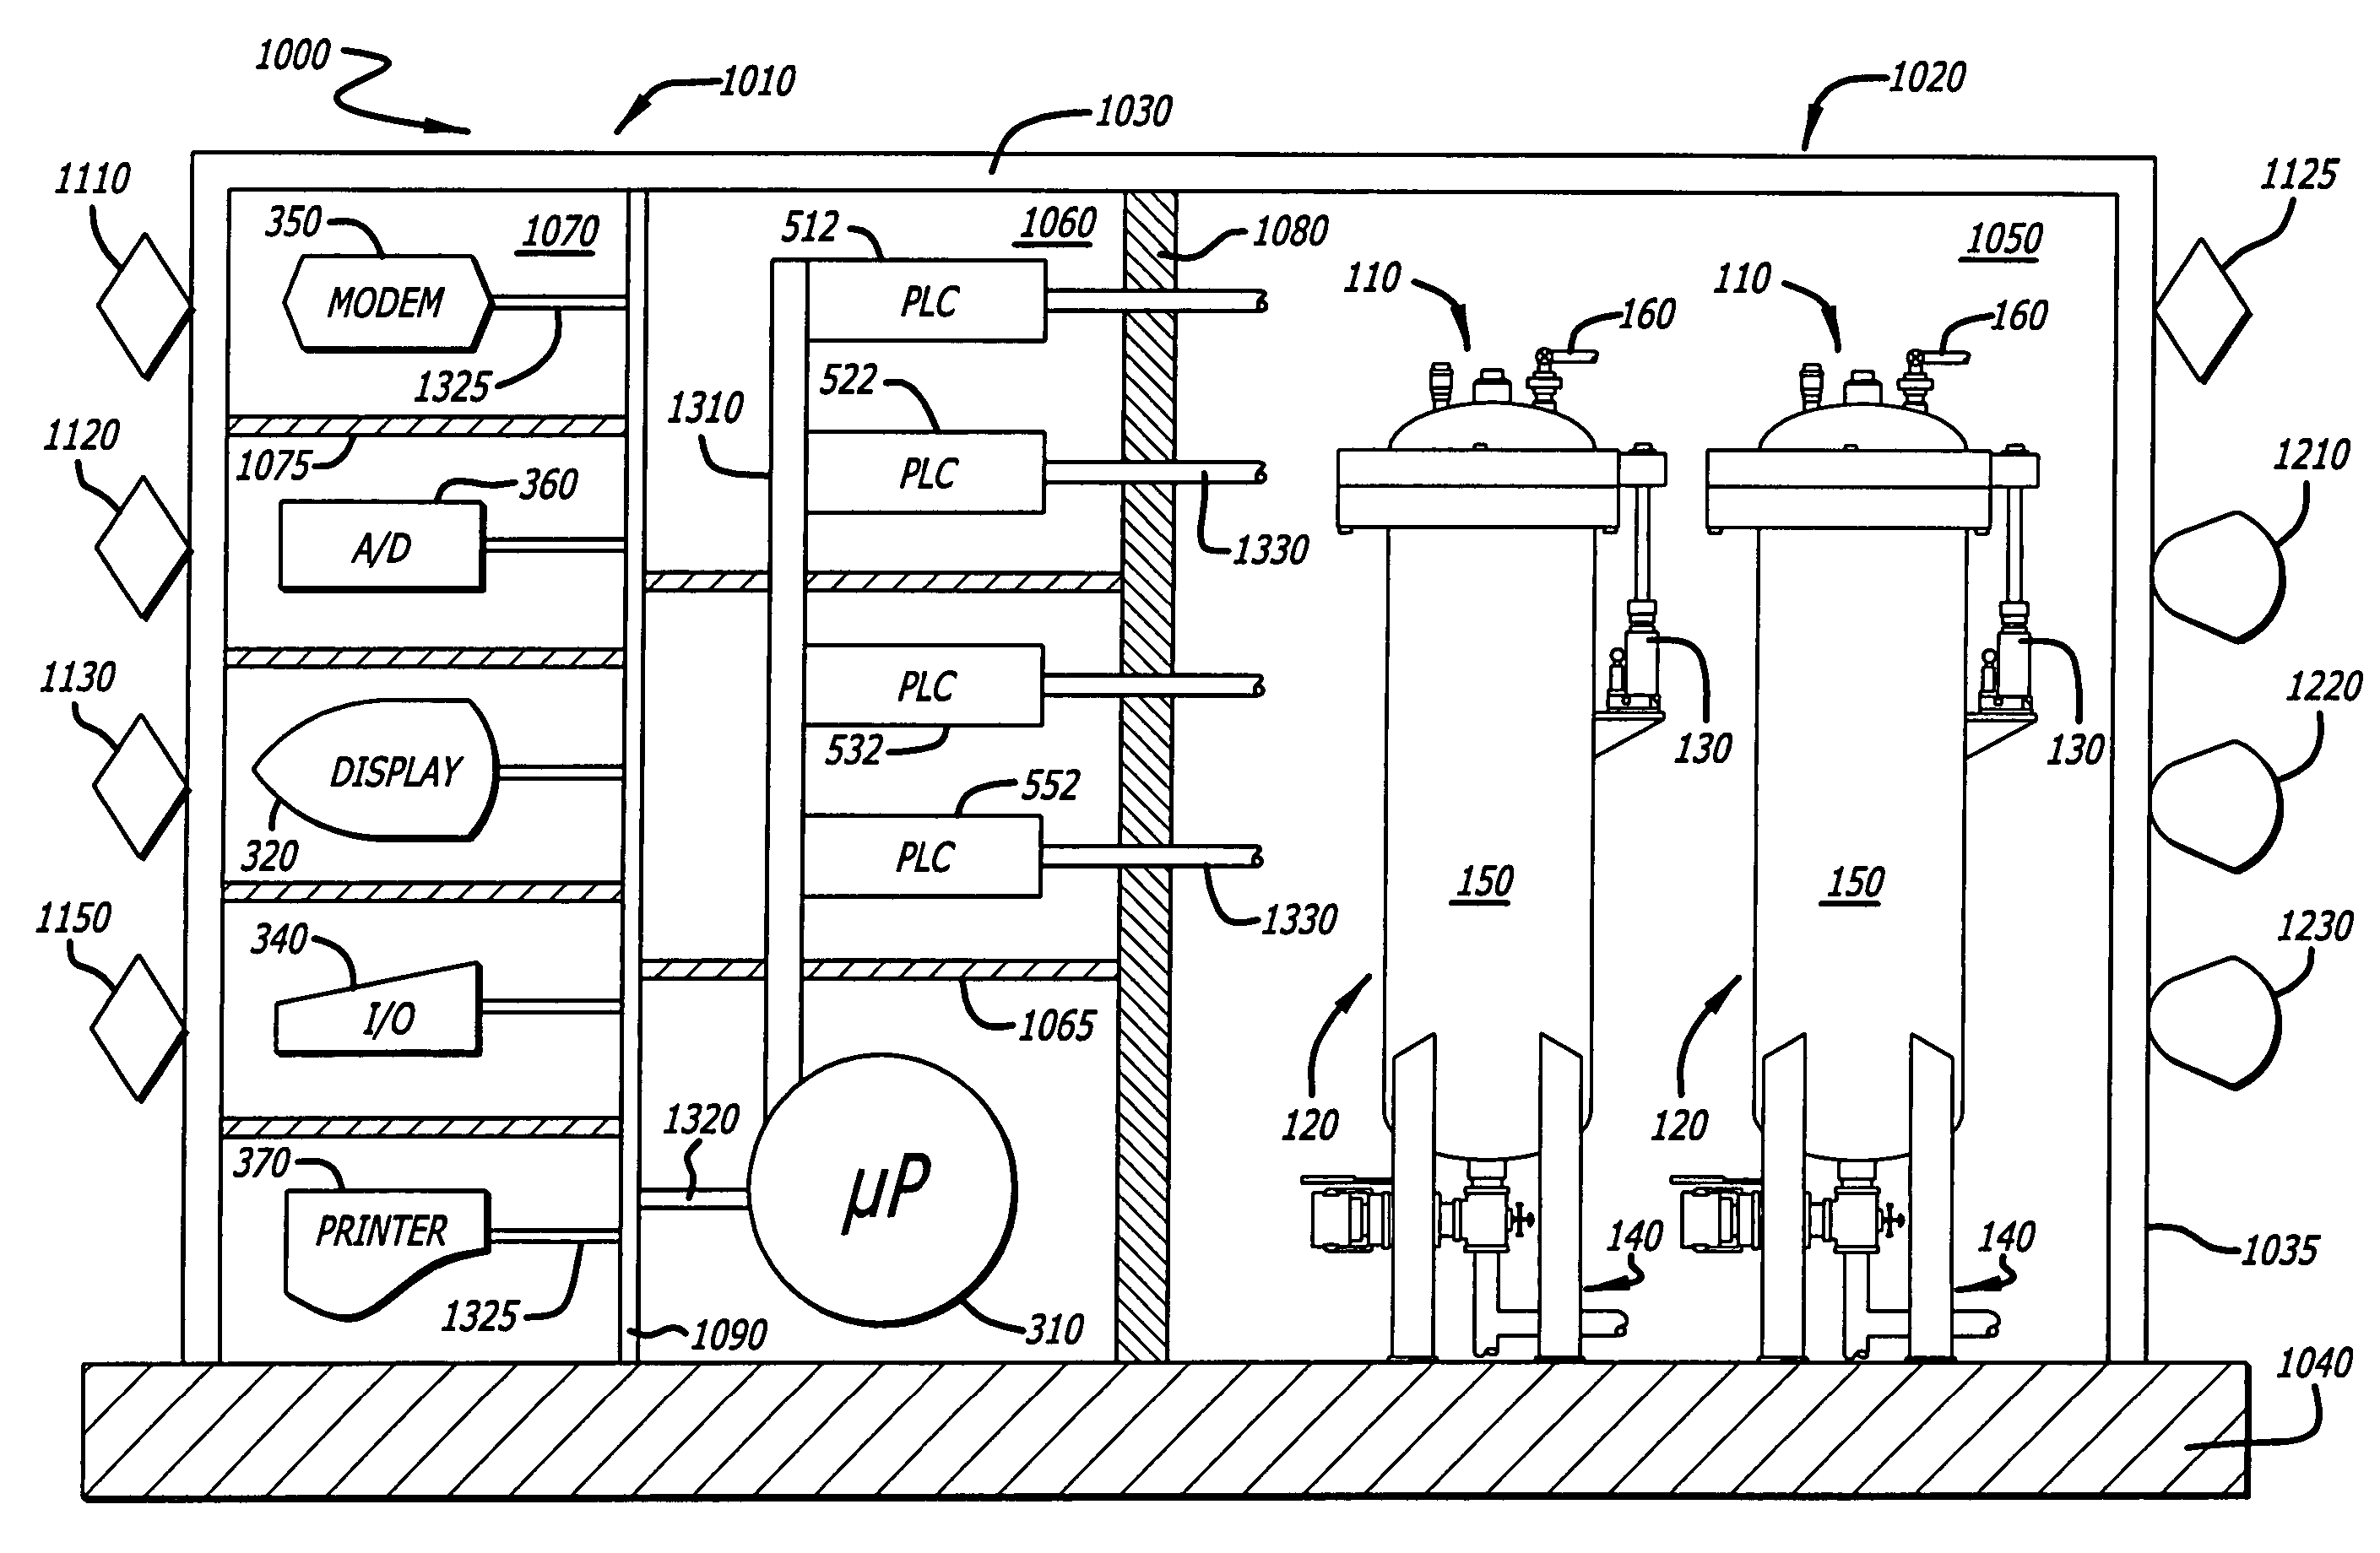 Integrated material transfer and dispensing system